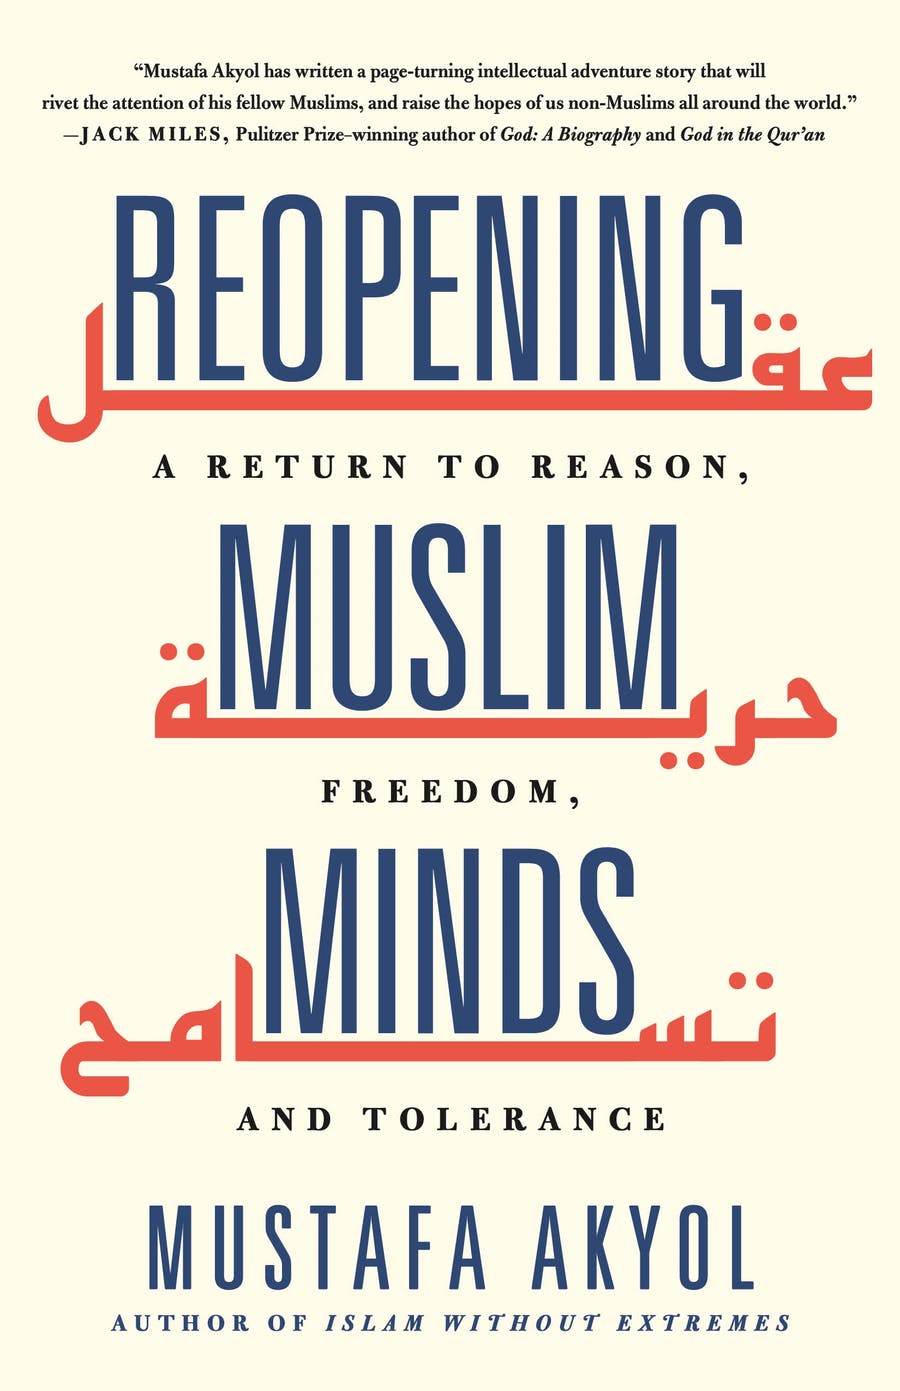 Cover of Mustafa Akyol's "Reopenng Muslim Minds. A Return to Reason, Freedom and Tolerance" (published by St. Martins Essentials)